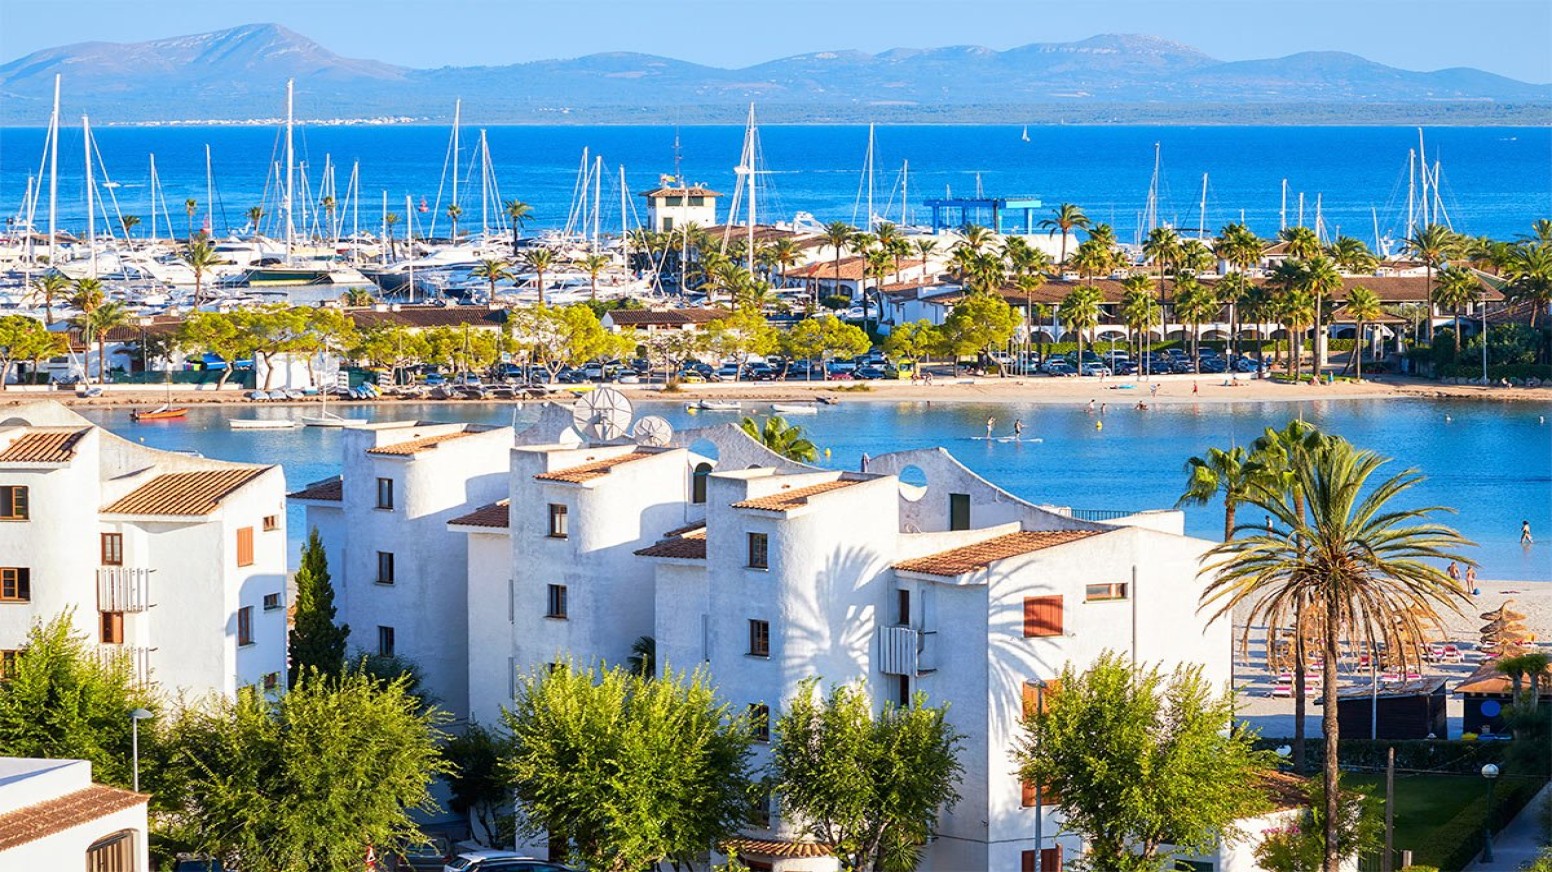 What is there to see in Alcudia